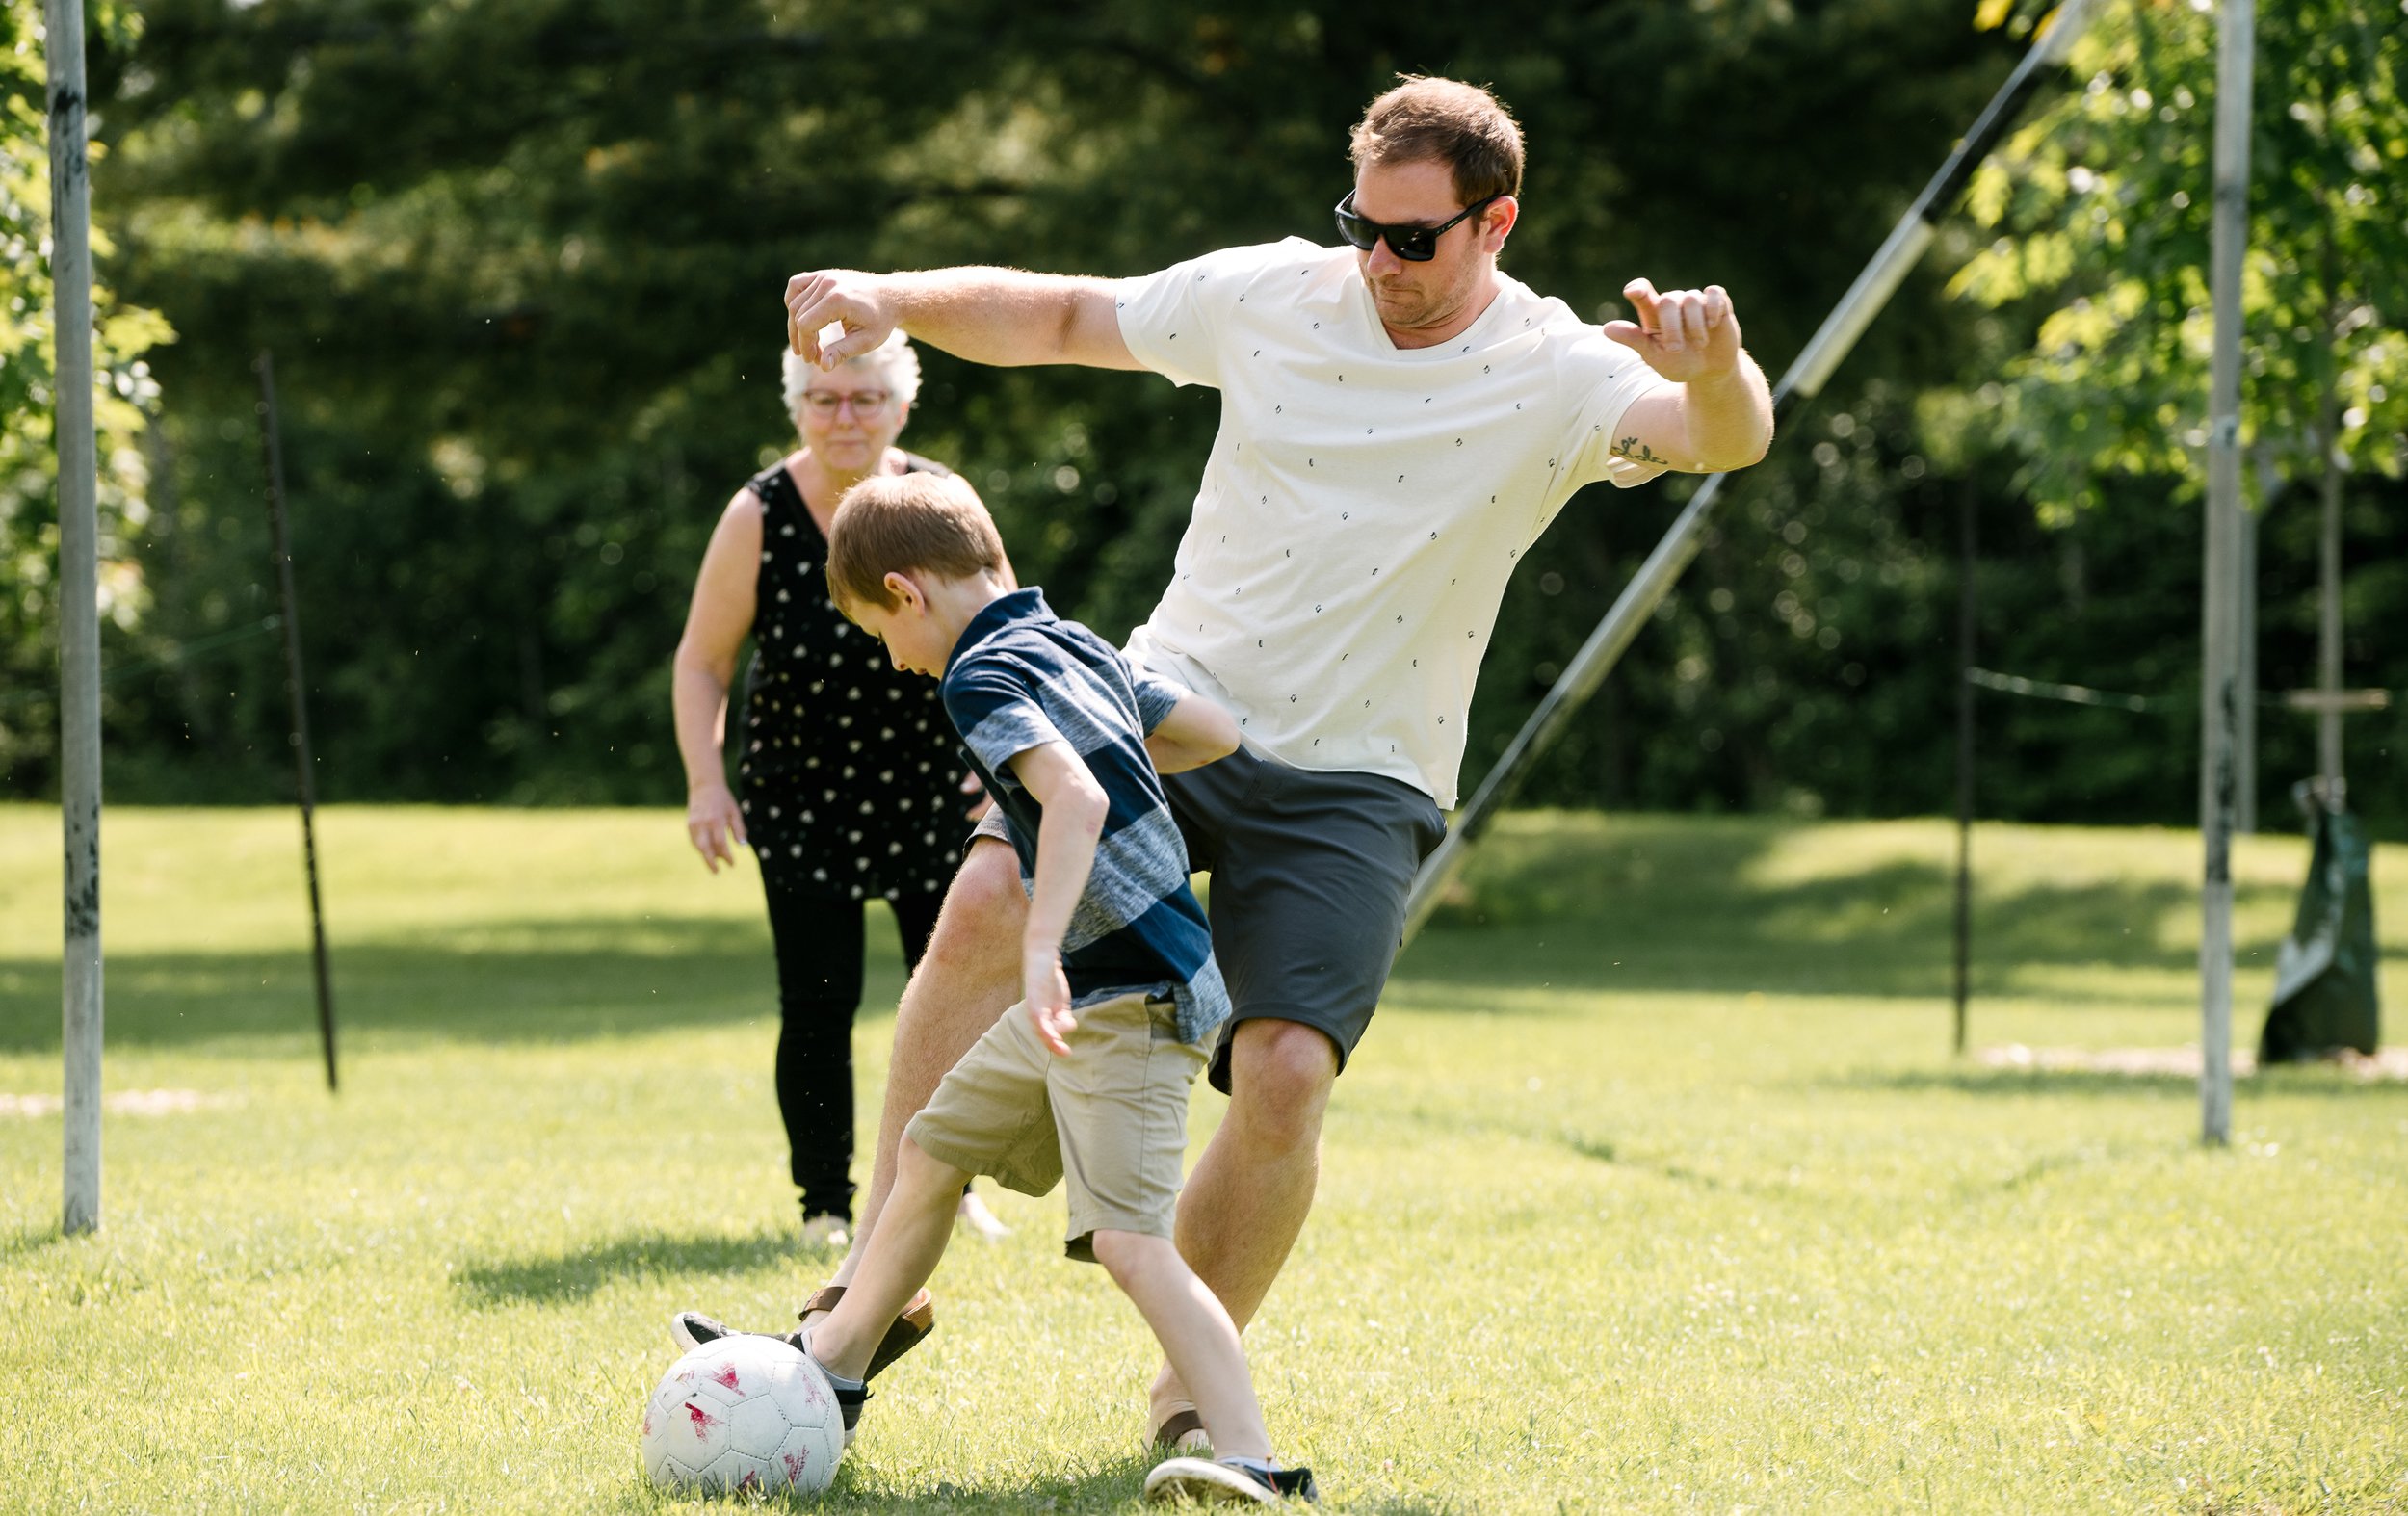 Dad and son playing football match.